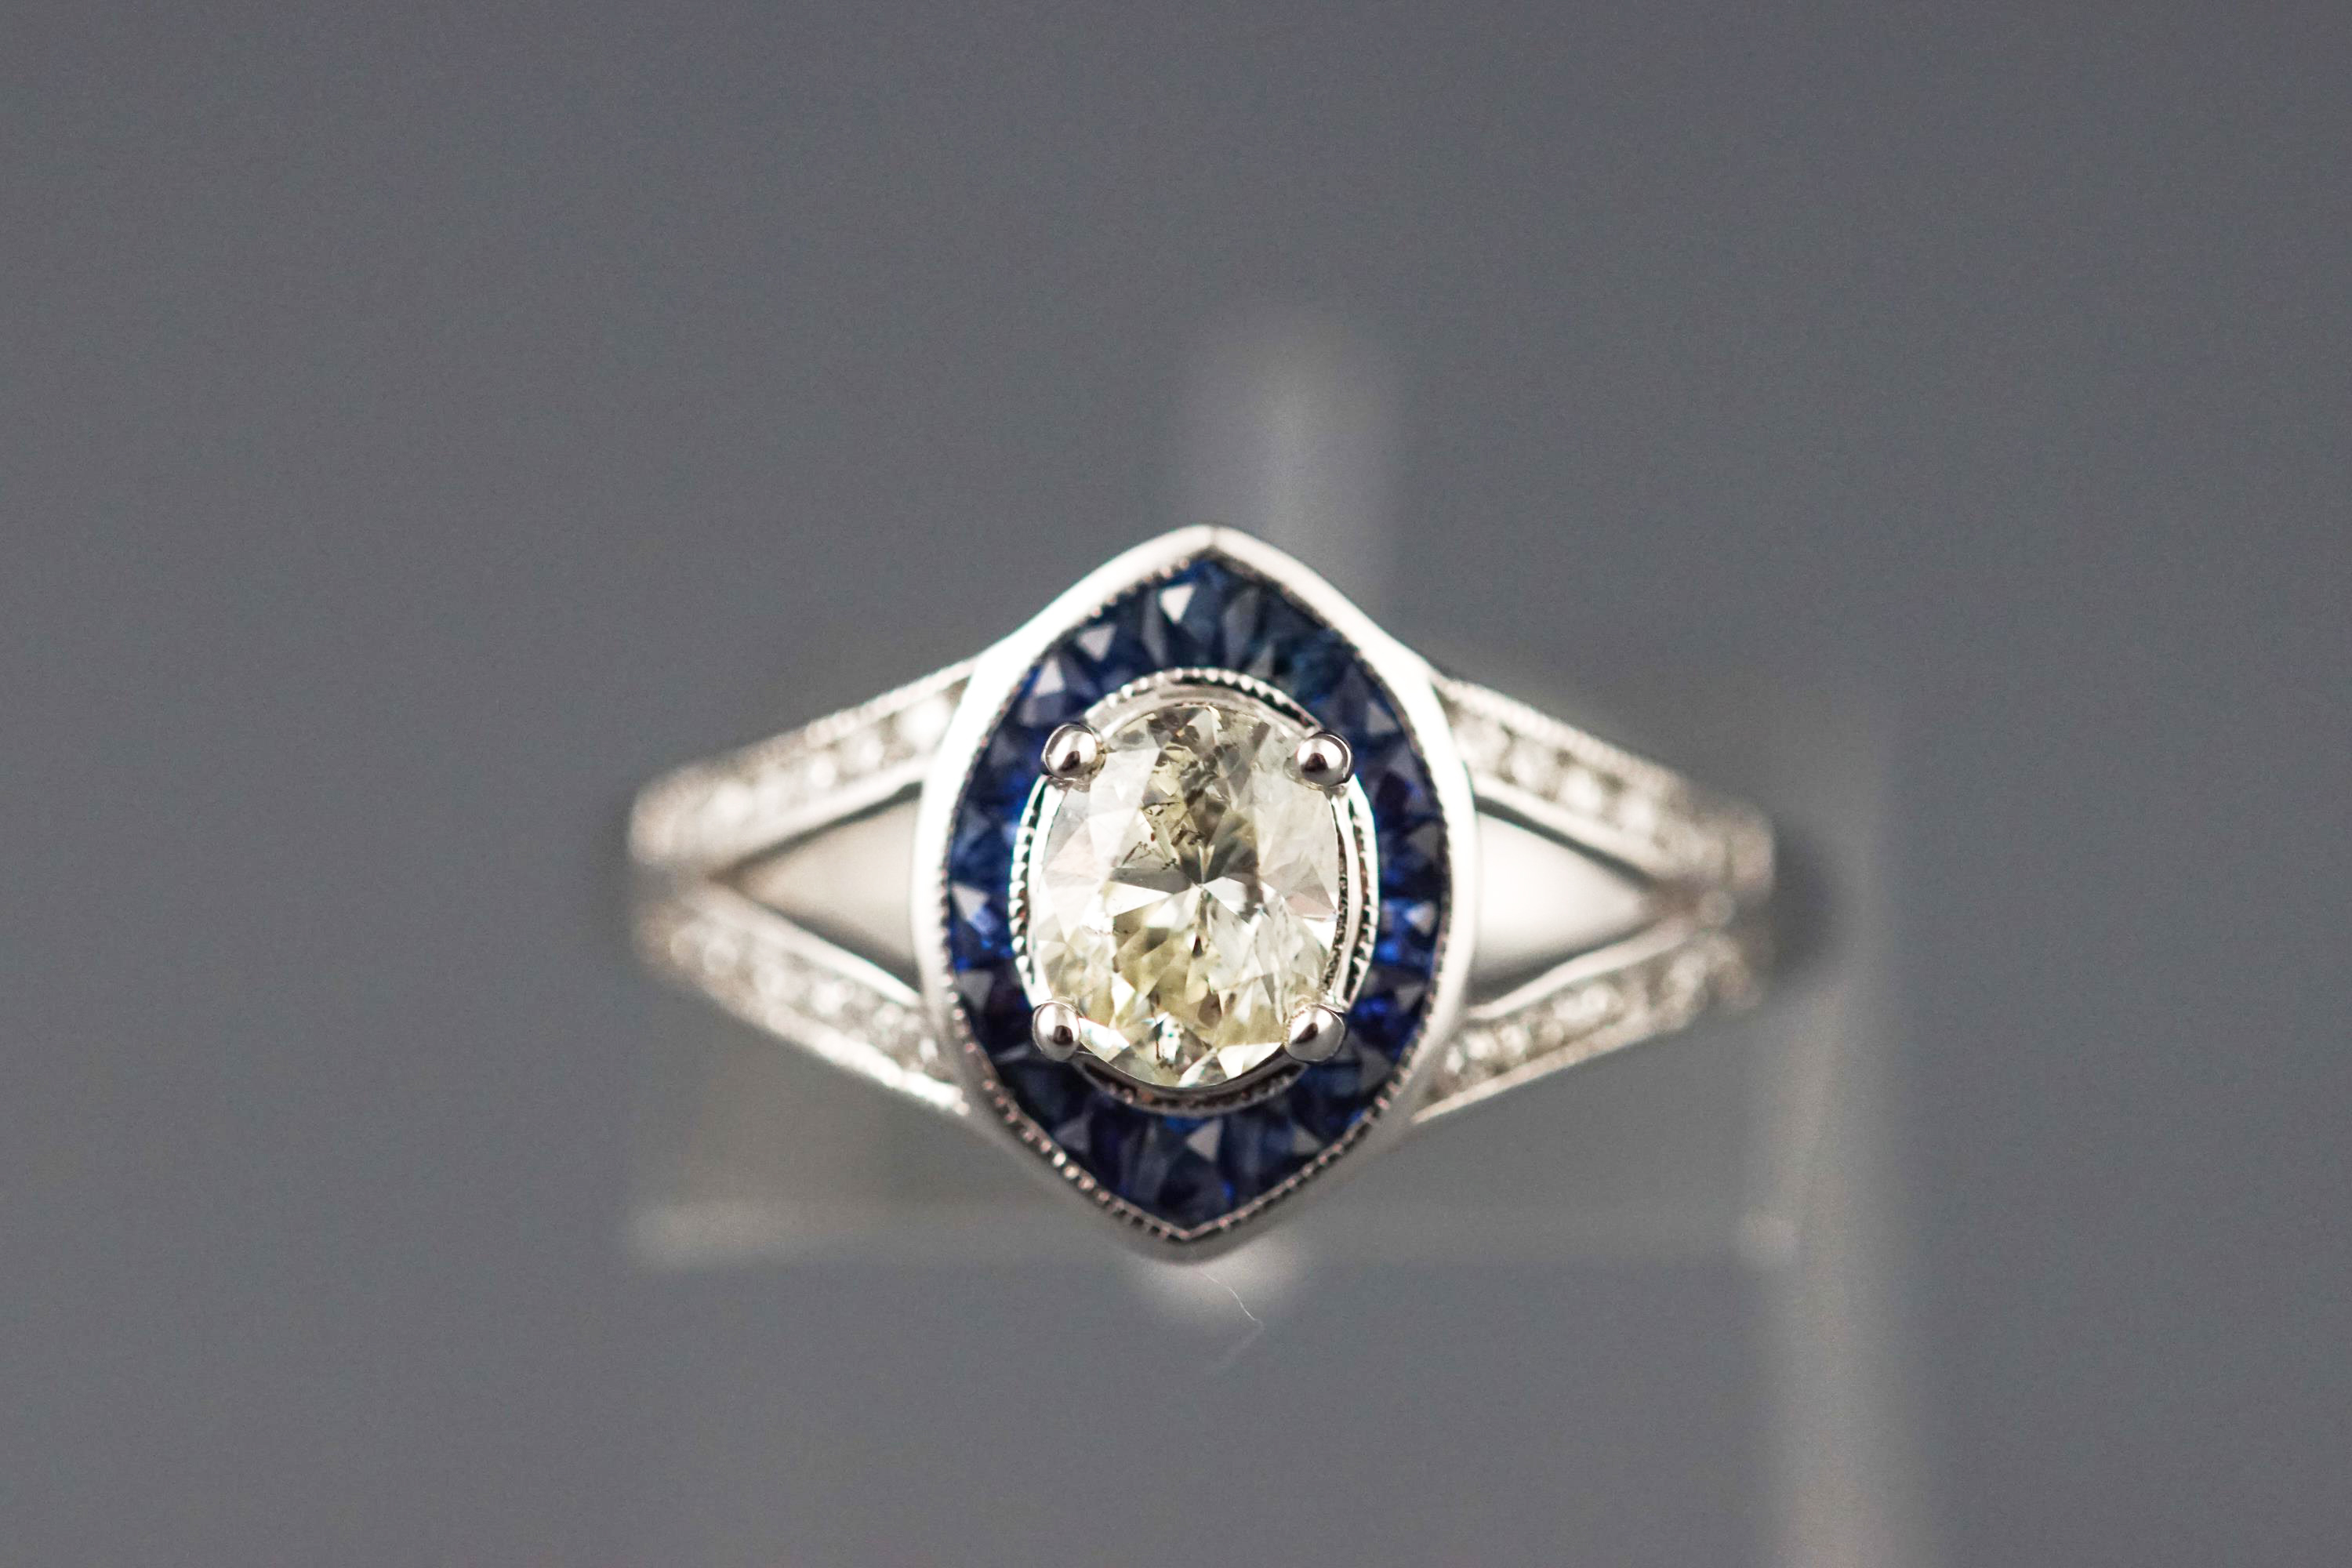 A white metal cluster ring set with a central oval brilliant cut diamond.